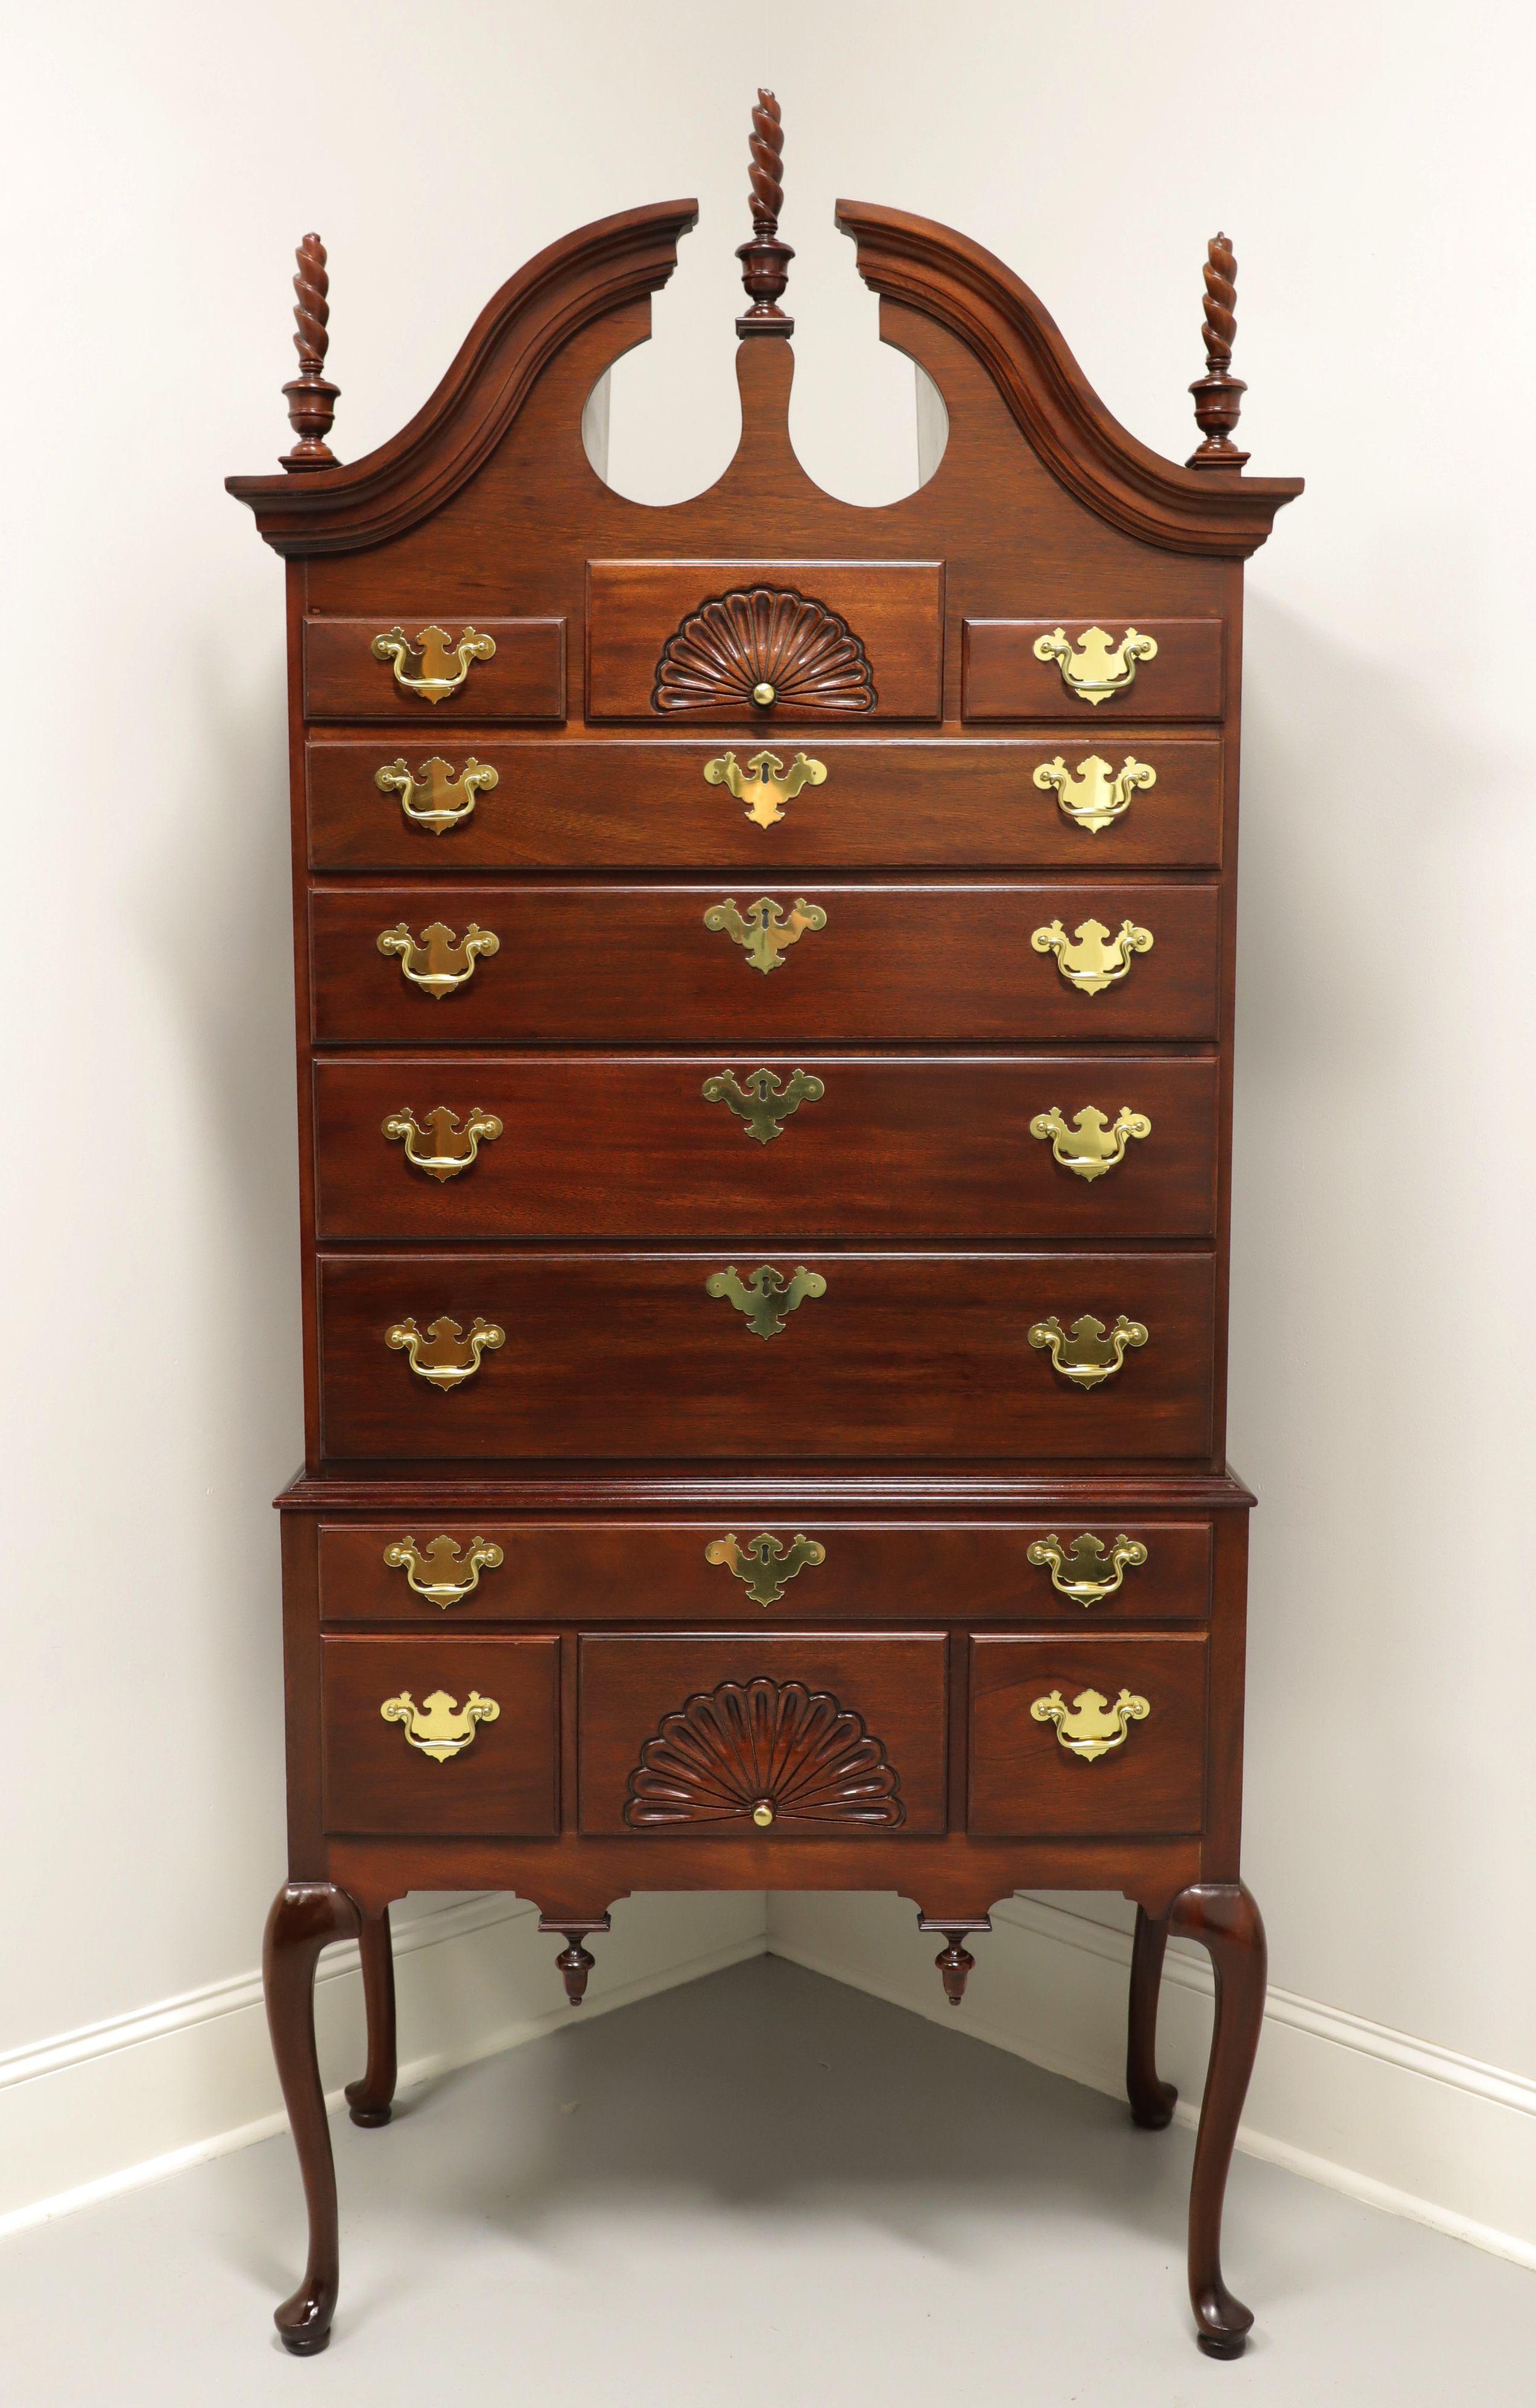 A Queen Anne style highboy chest by Councill Craftsmen. Mahogany with brass hardware, broken bonnet top with center & side plume form finials, open fan carvings to two drawers, carved reverse finials to apron, cabriole legs and pad feet. Features